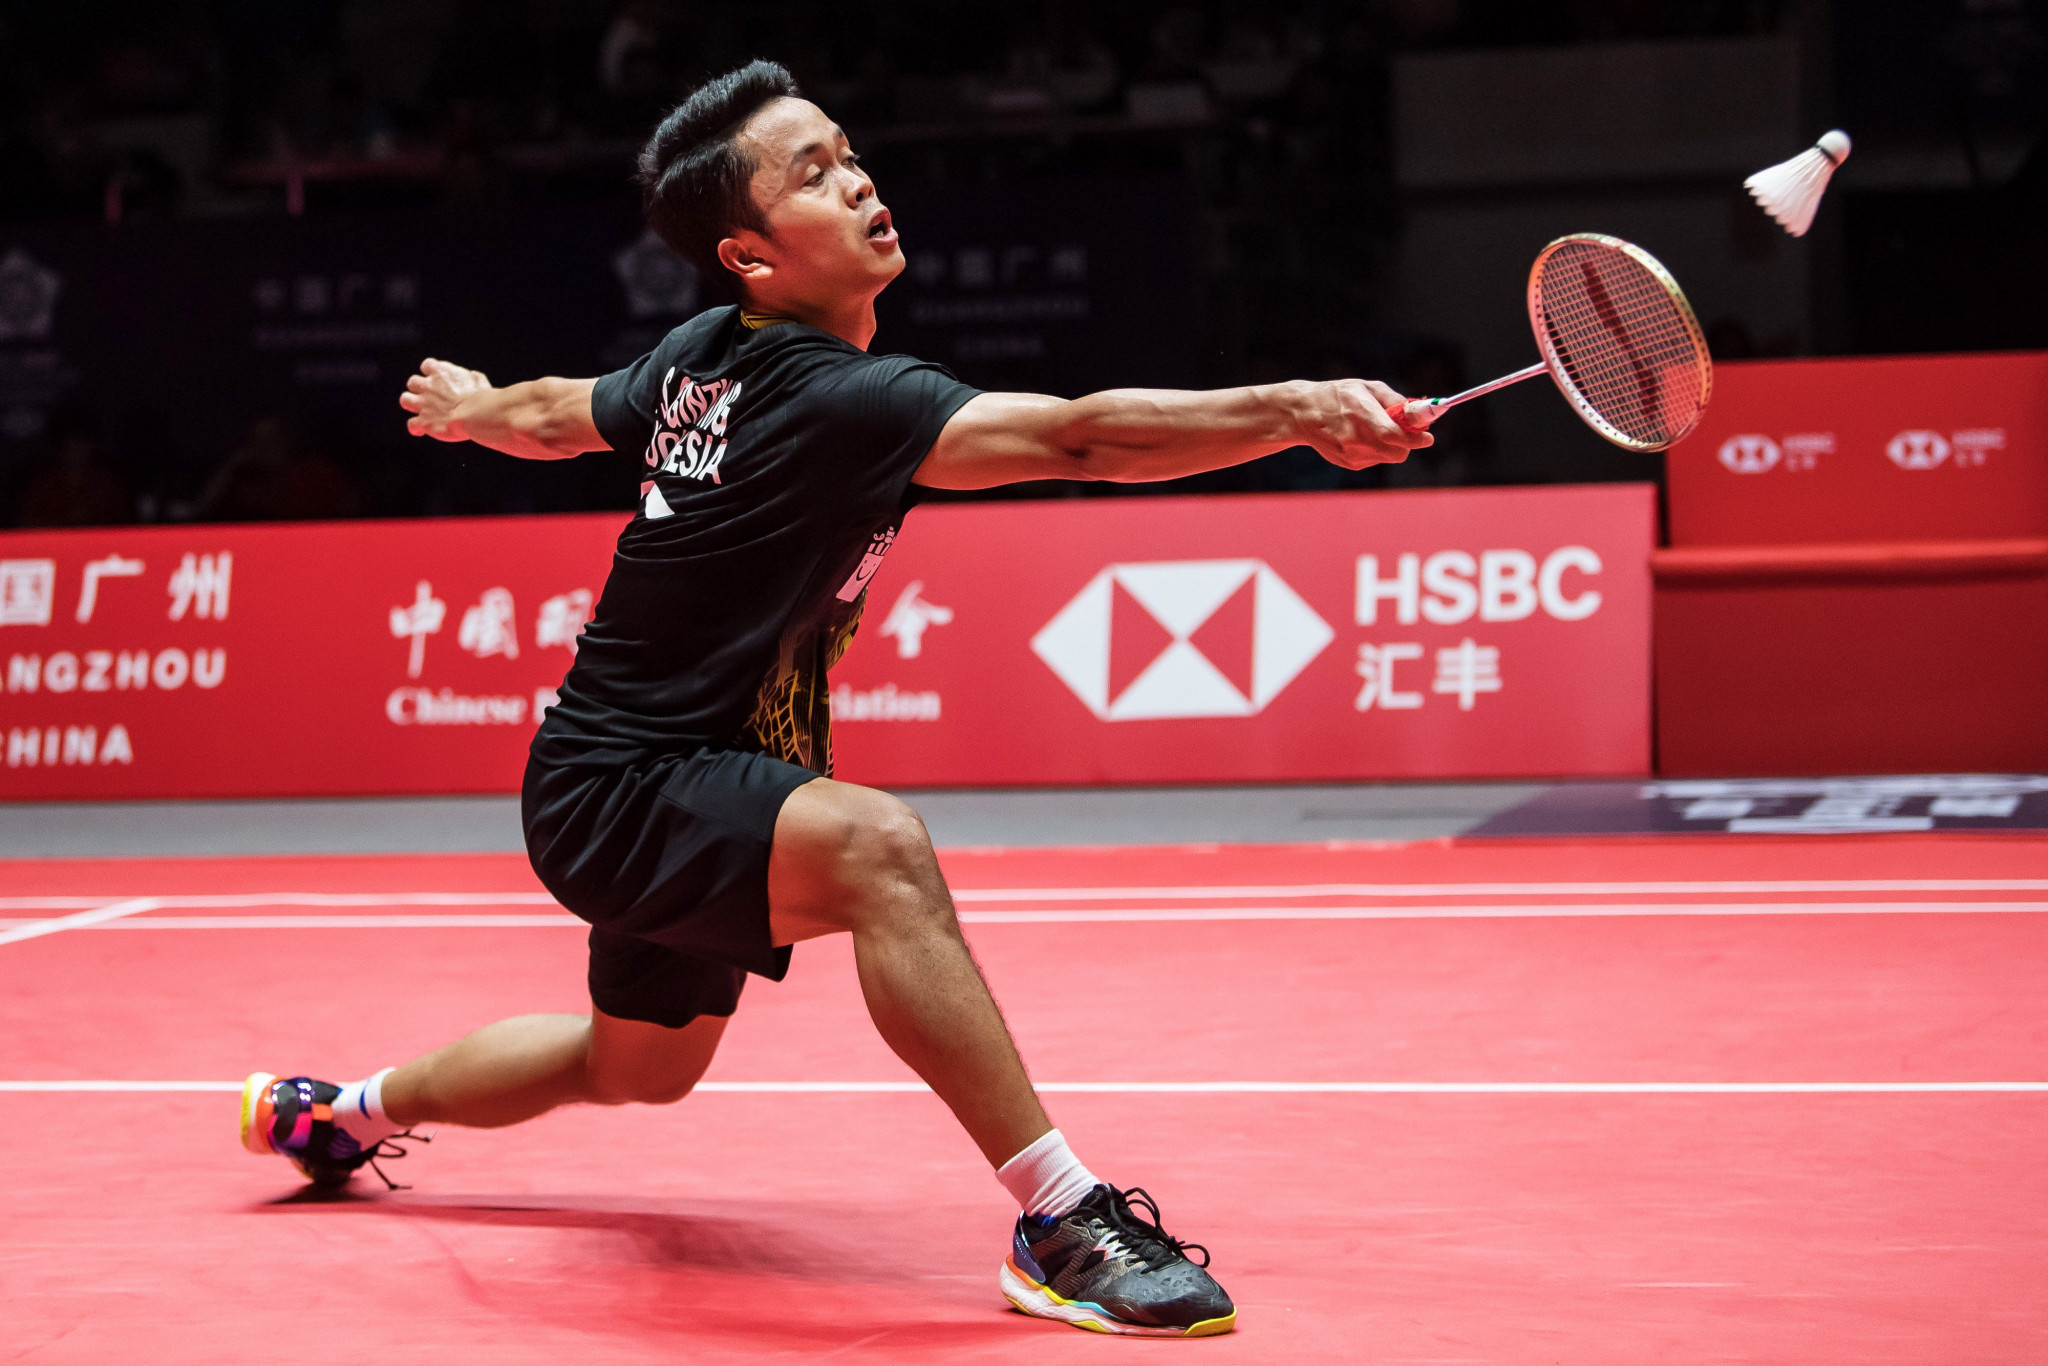 HSBC will remain the title sponsor of the BWF World Tour next year ©Getty Images